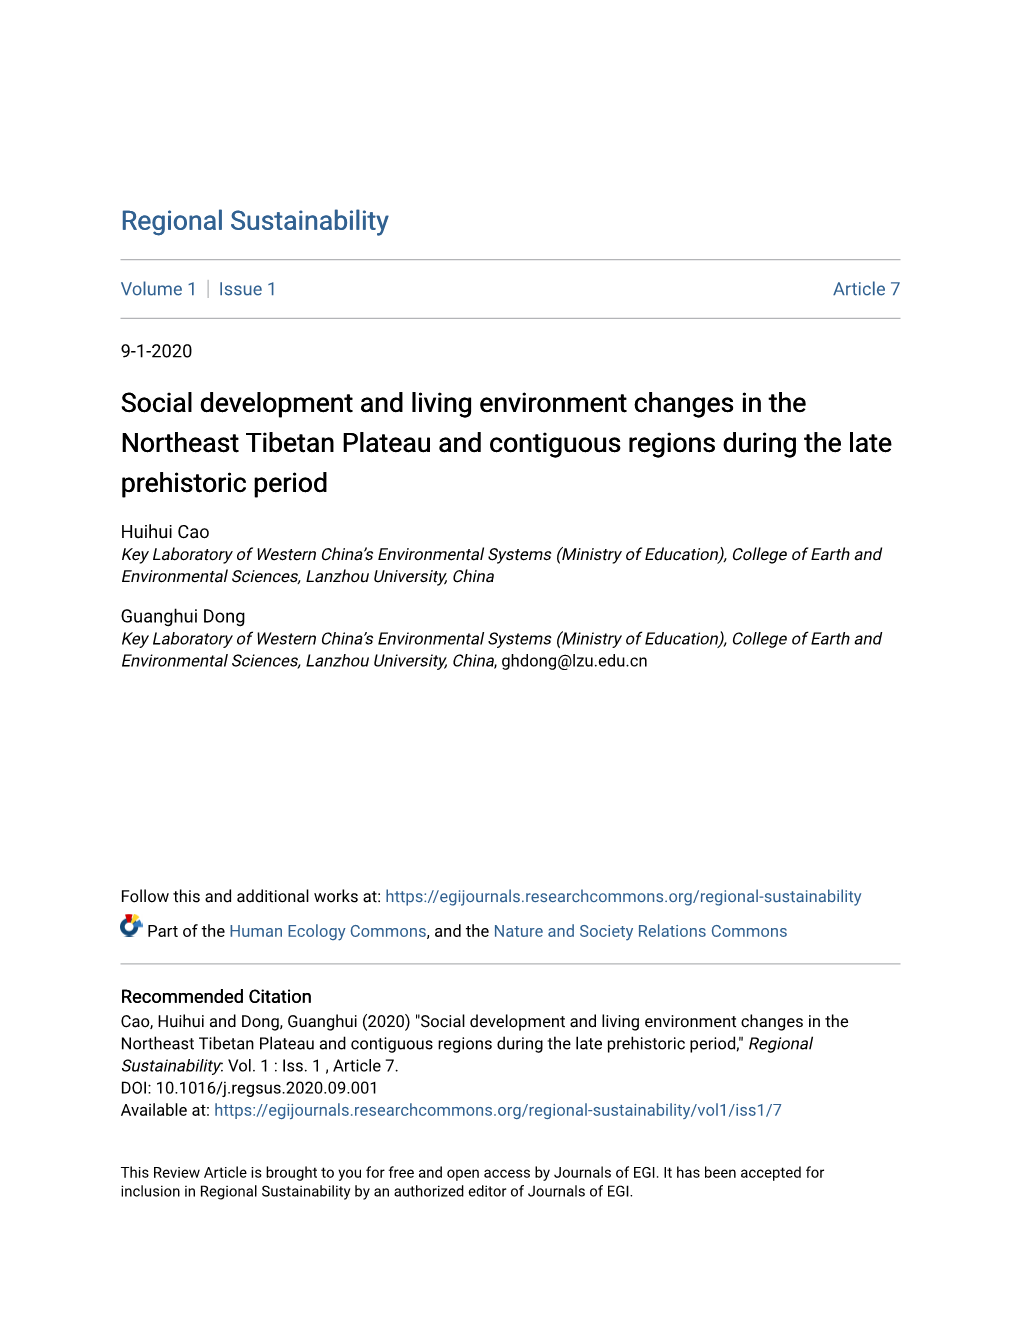 Social Development and Living Environment Changes in the Northeast Tibetan Plateau and Contiguous Regions During the Late Prehistoric Period